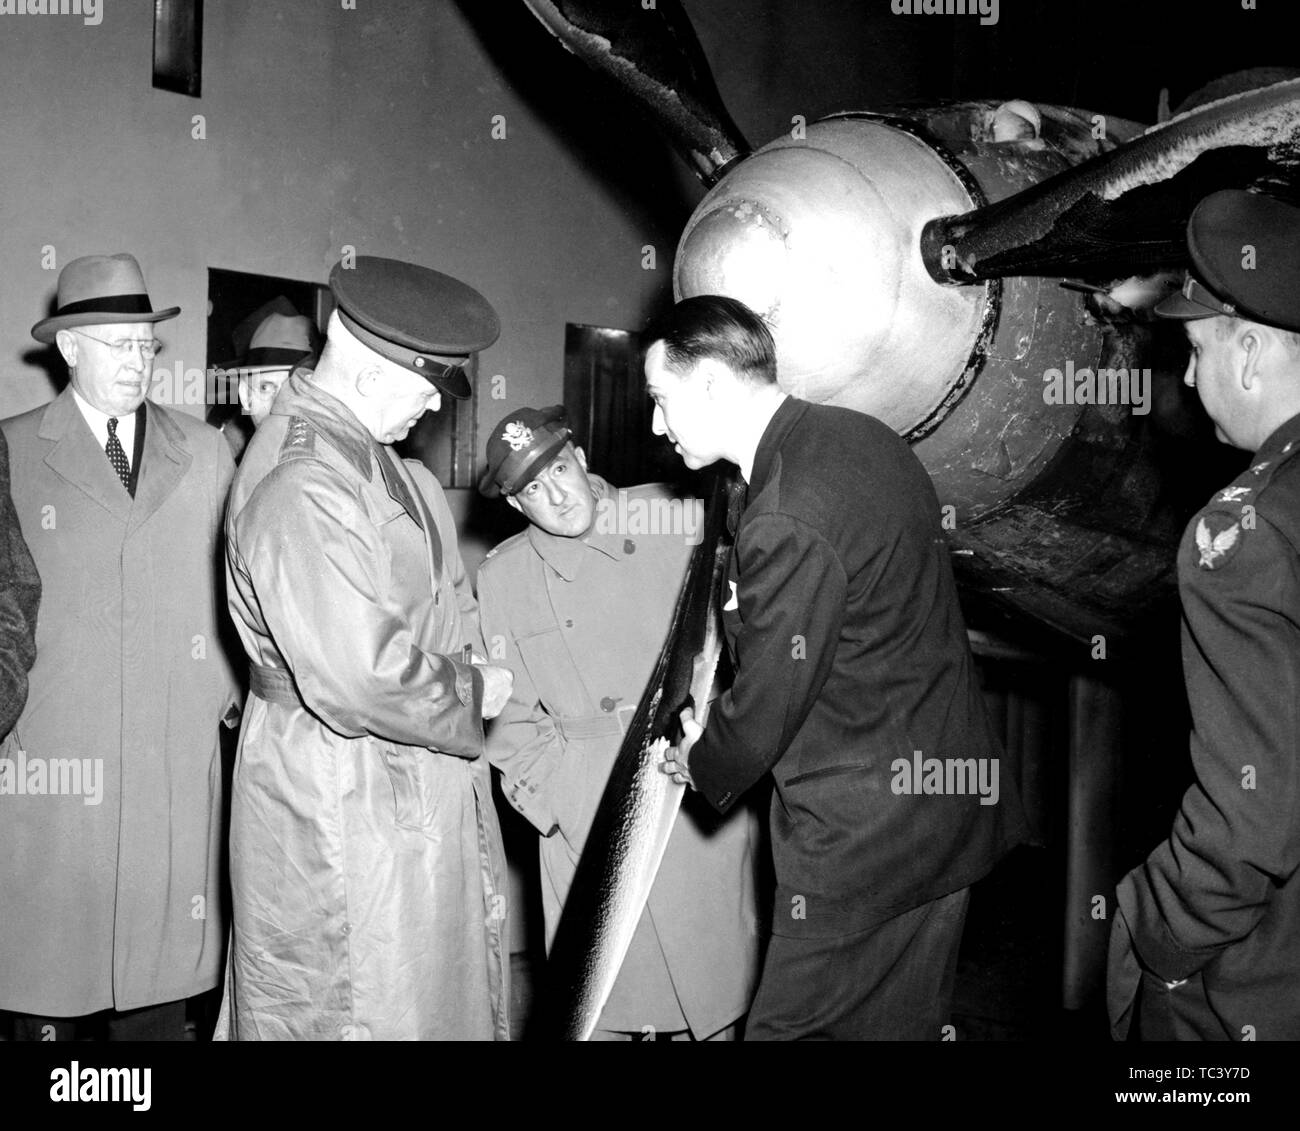 General Henry Harley 'Hap' Arnold (1886 - 1950), in long coat, inspects ice formation on propeller blades at the Aircraft Engine Research Laboratory in Cleveland, Ohio, November 9, 1944. Image courtesy National Aeronautics and Space Administration (NASA). () Stock Photo